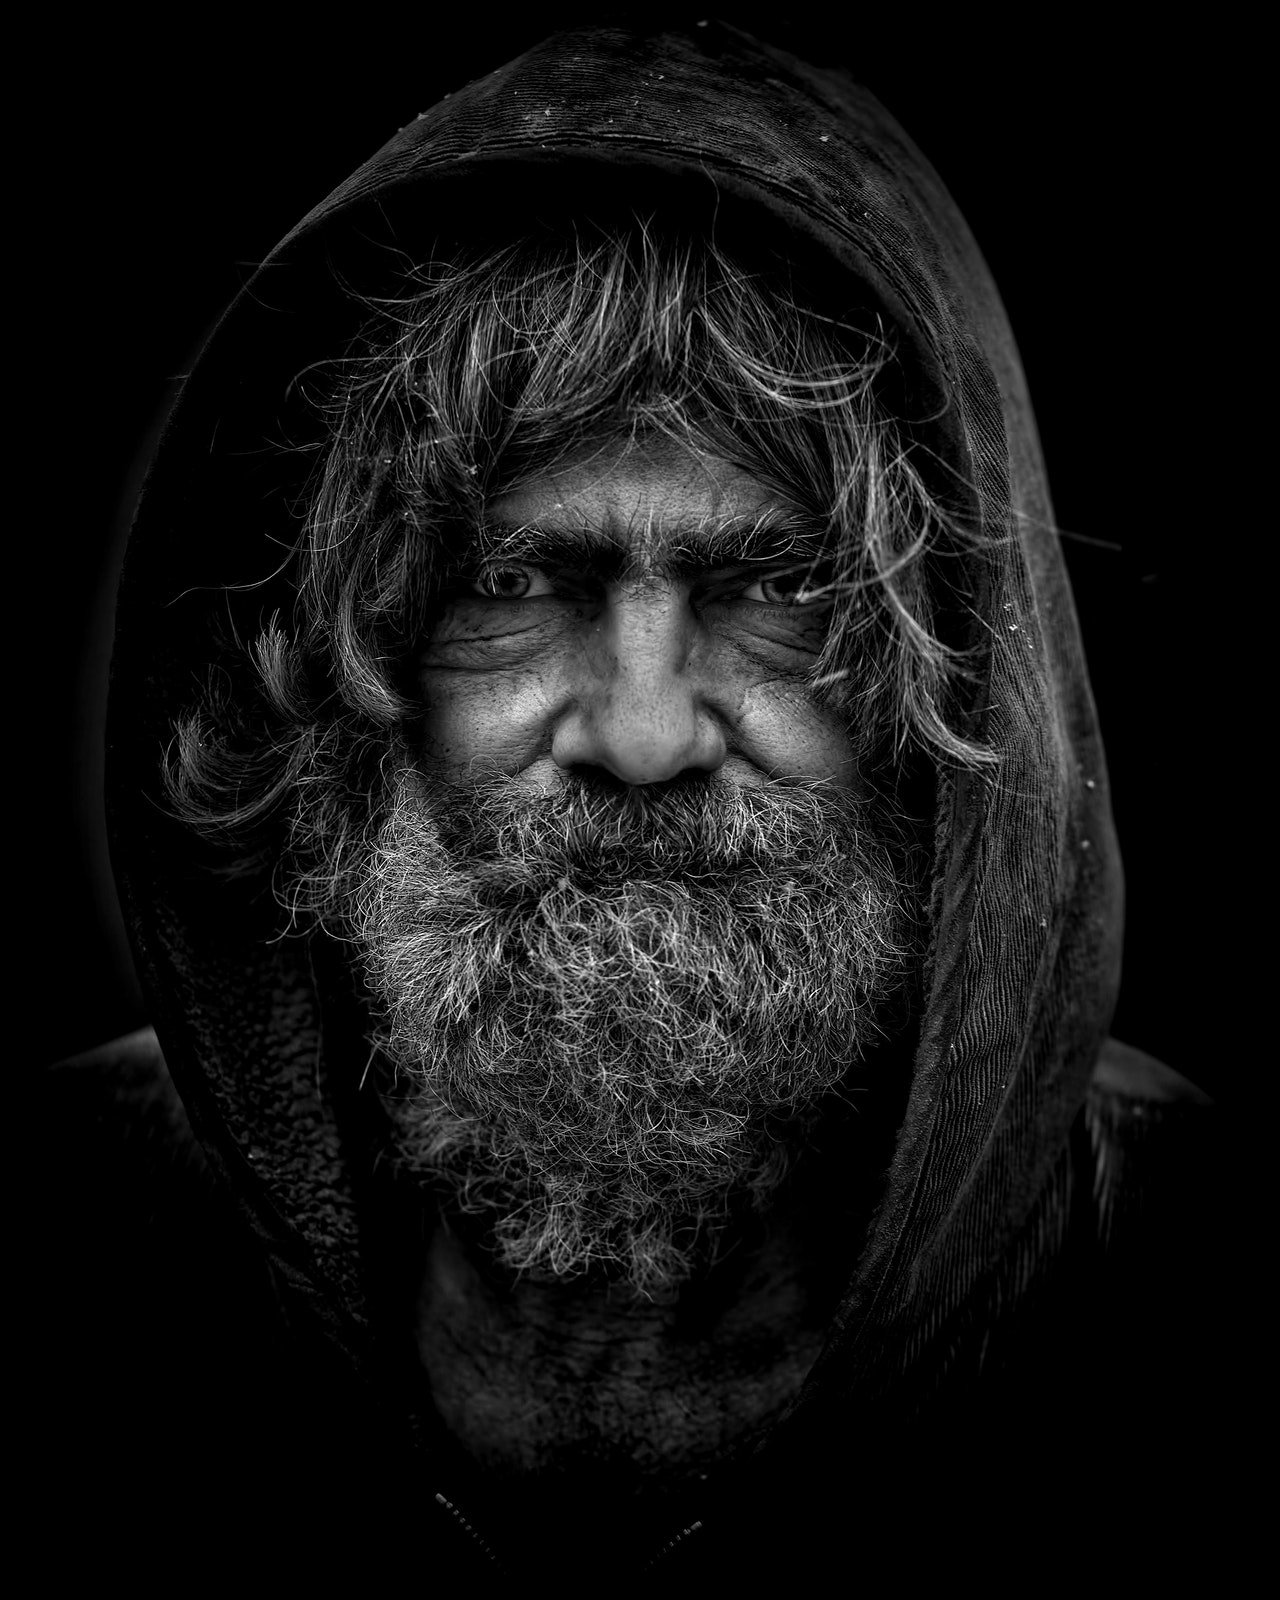 The homeless man asked him for food. | Source: Pexels